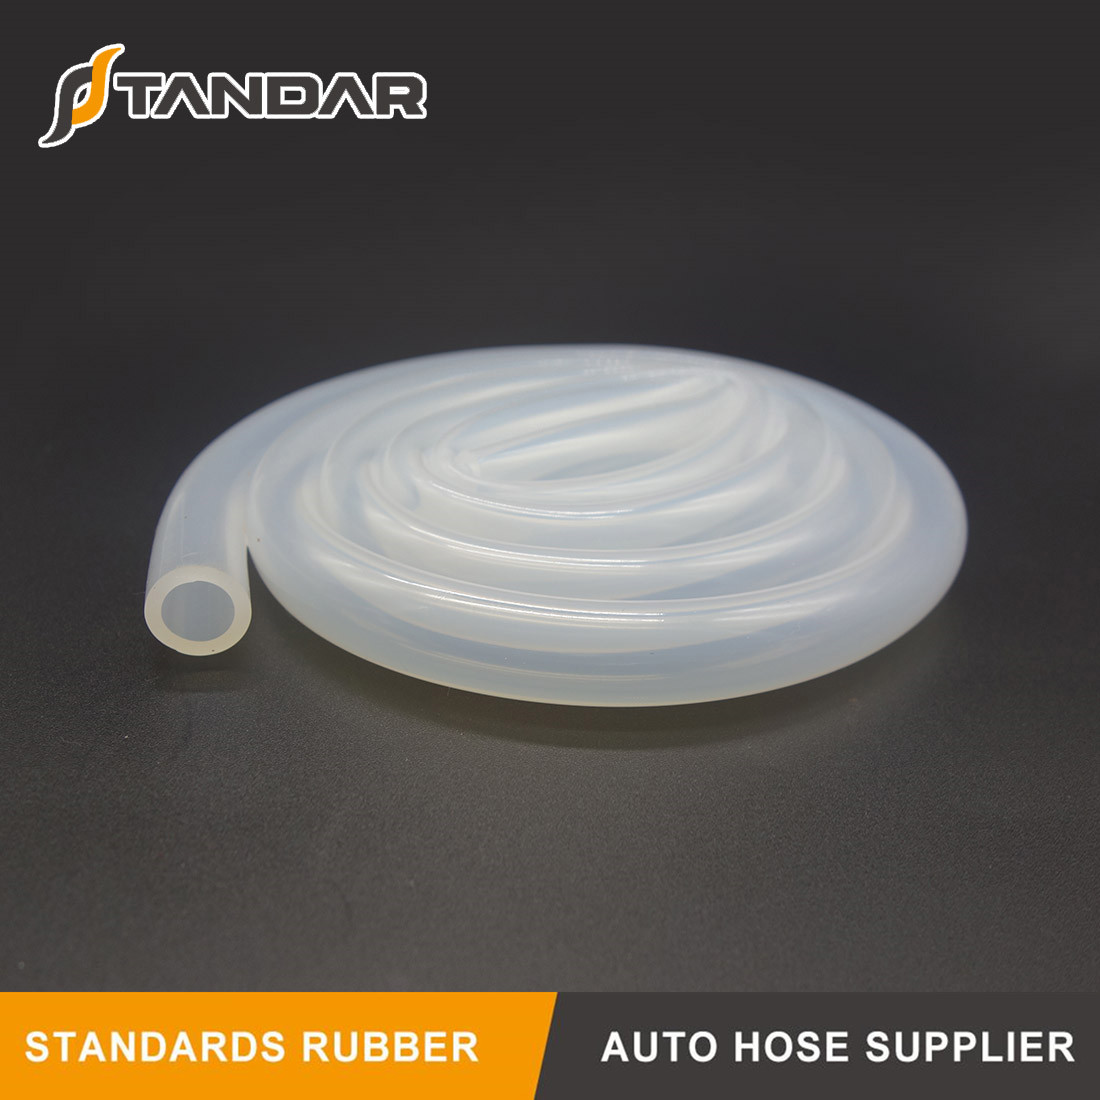 What are the causes of wear and tear of silicone tubings?